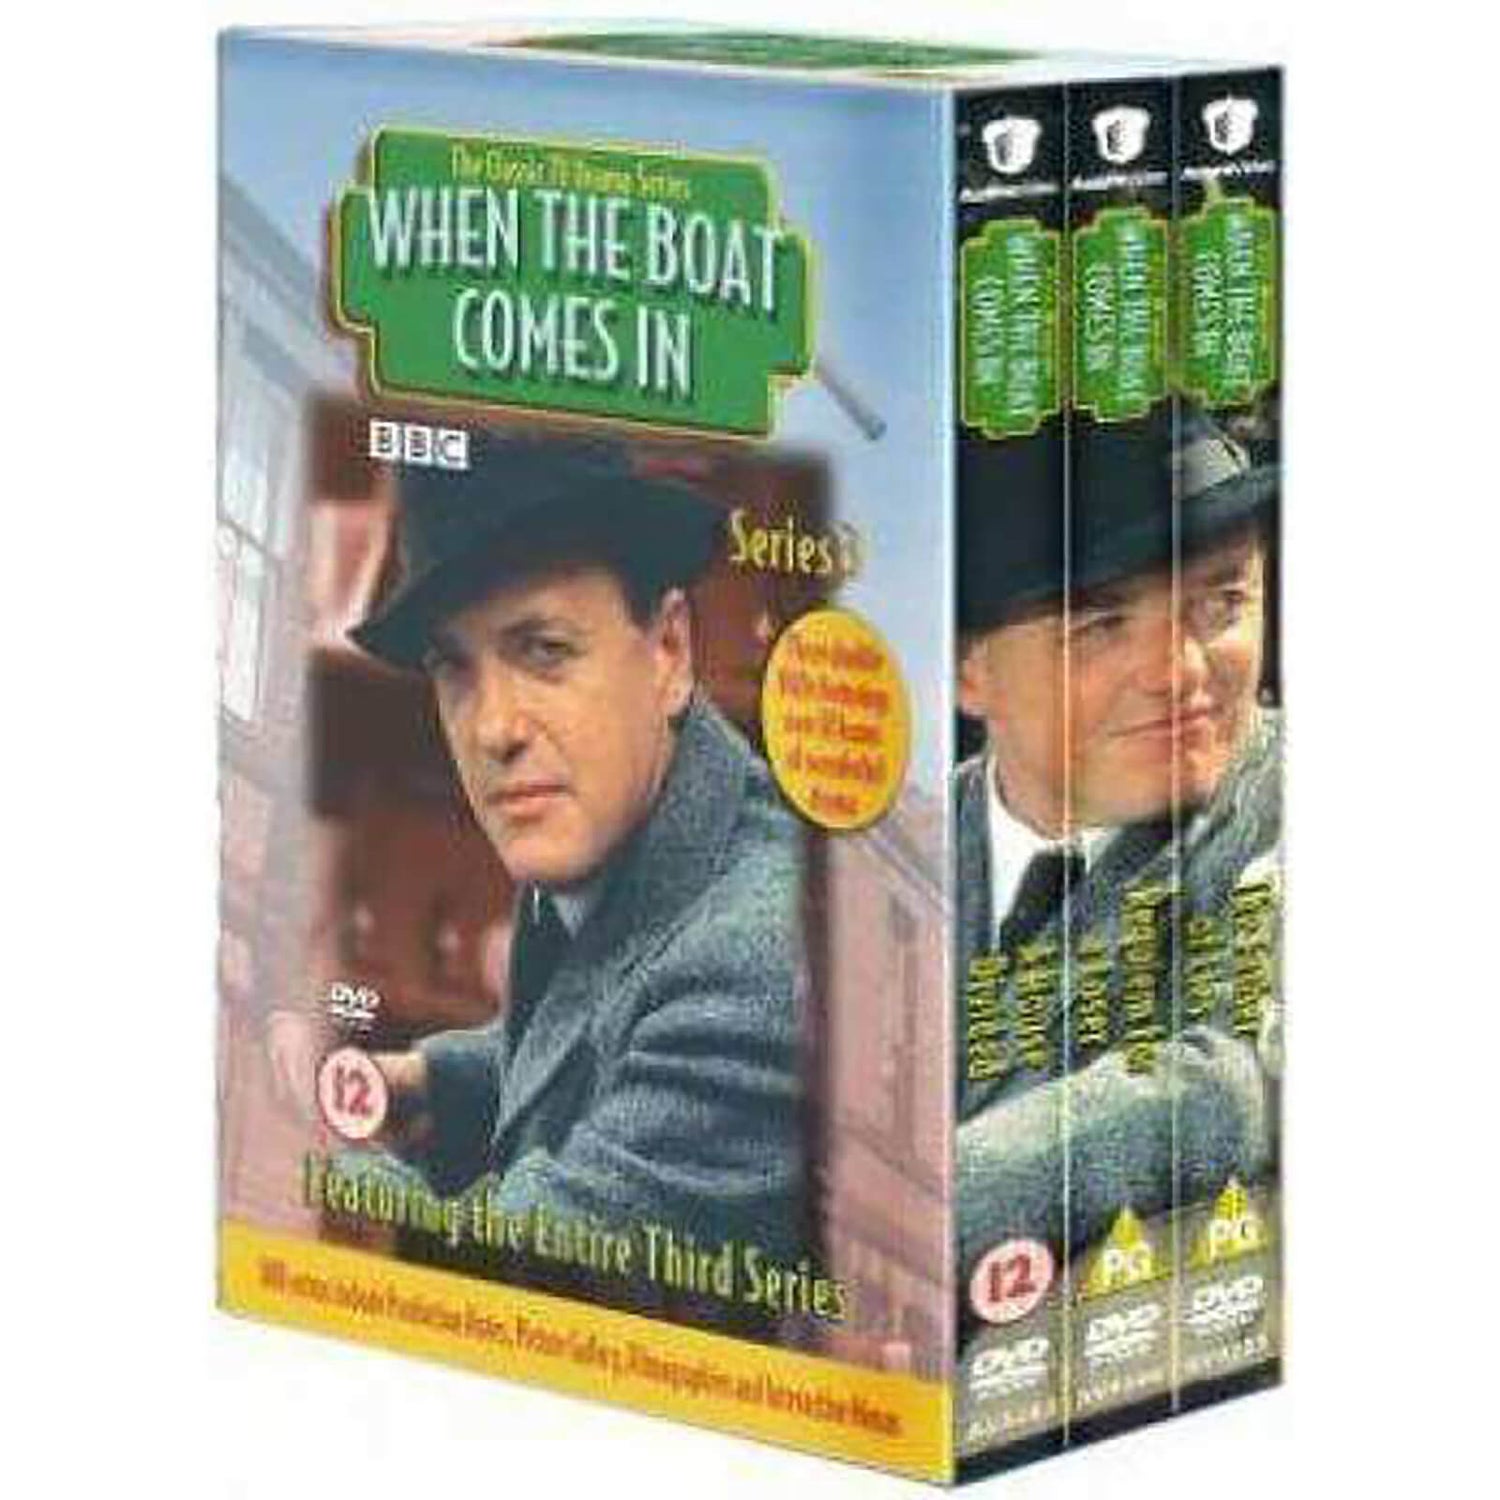 When The Boat Comes In - Series 3 Box Set